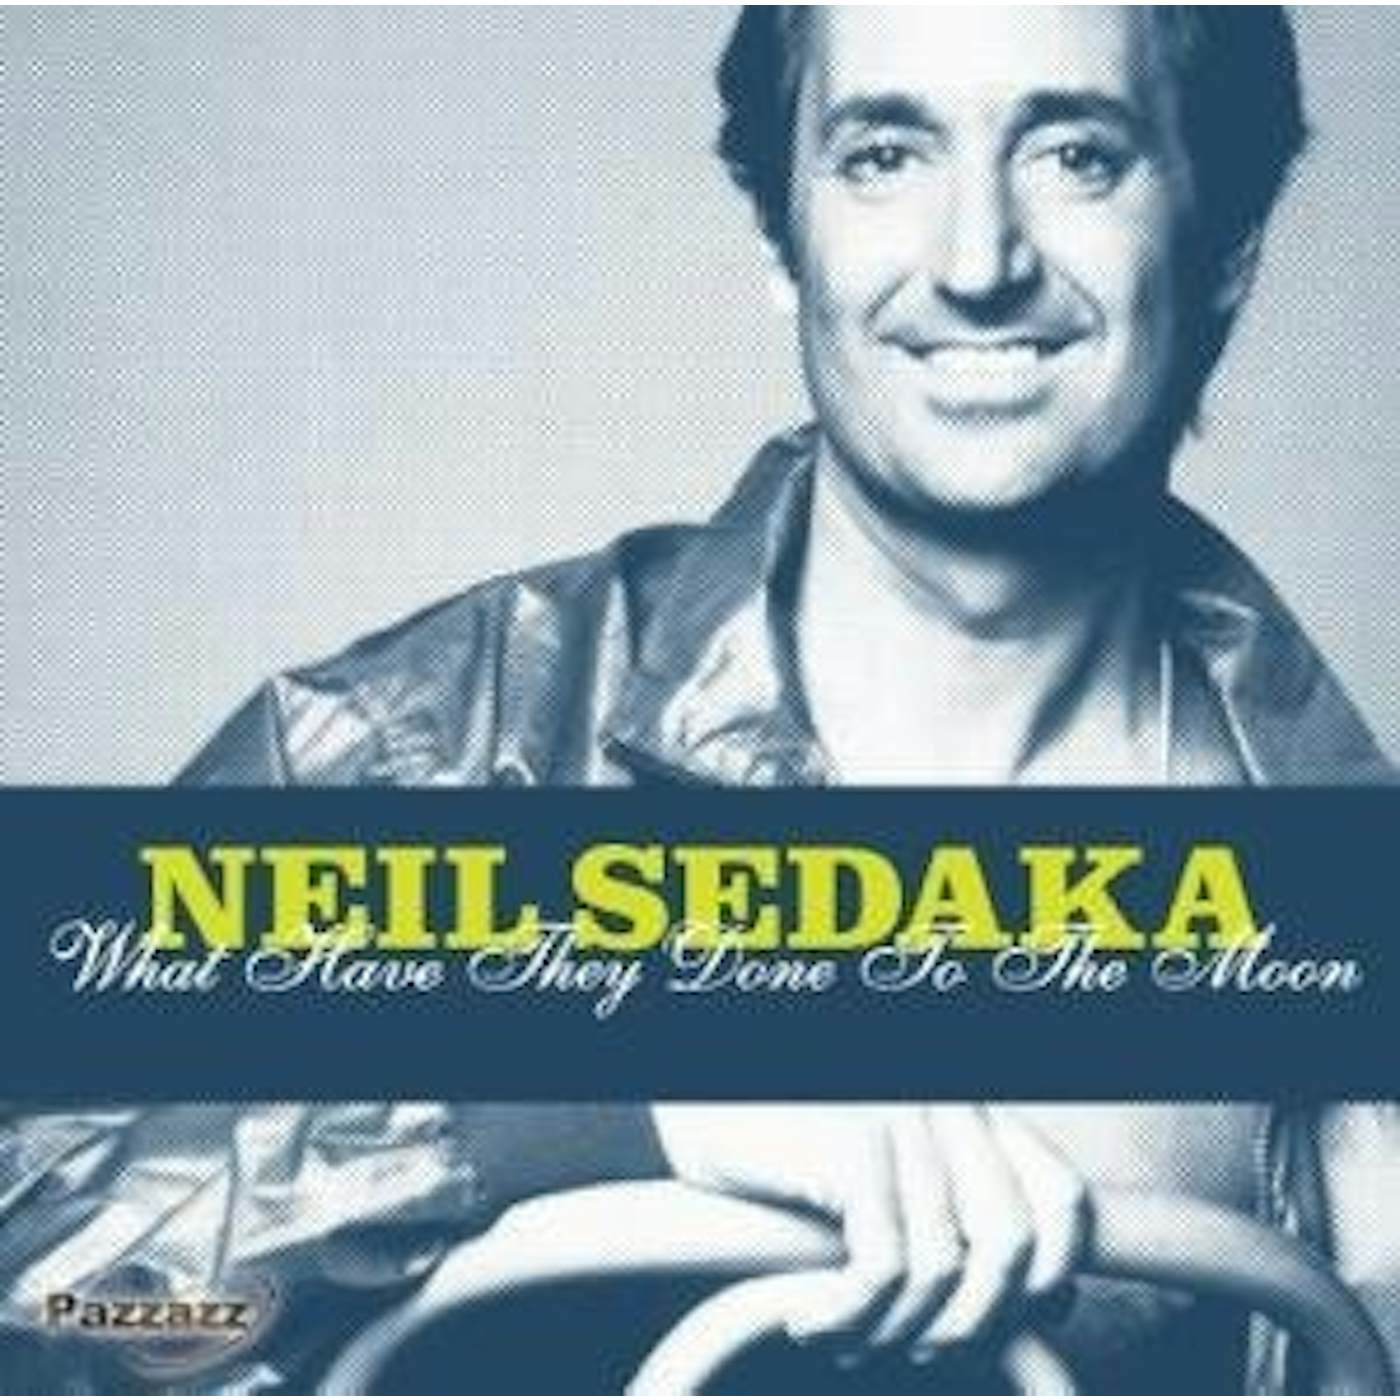 Neil Sedaka WHAT HAVE THEY DONE TO THE MOON CD